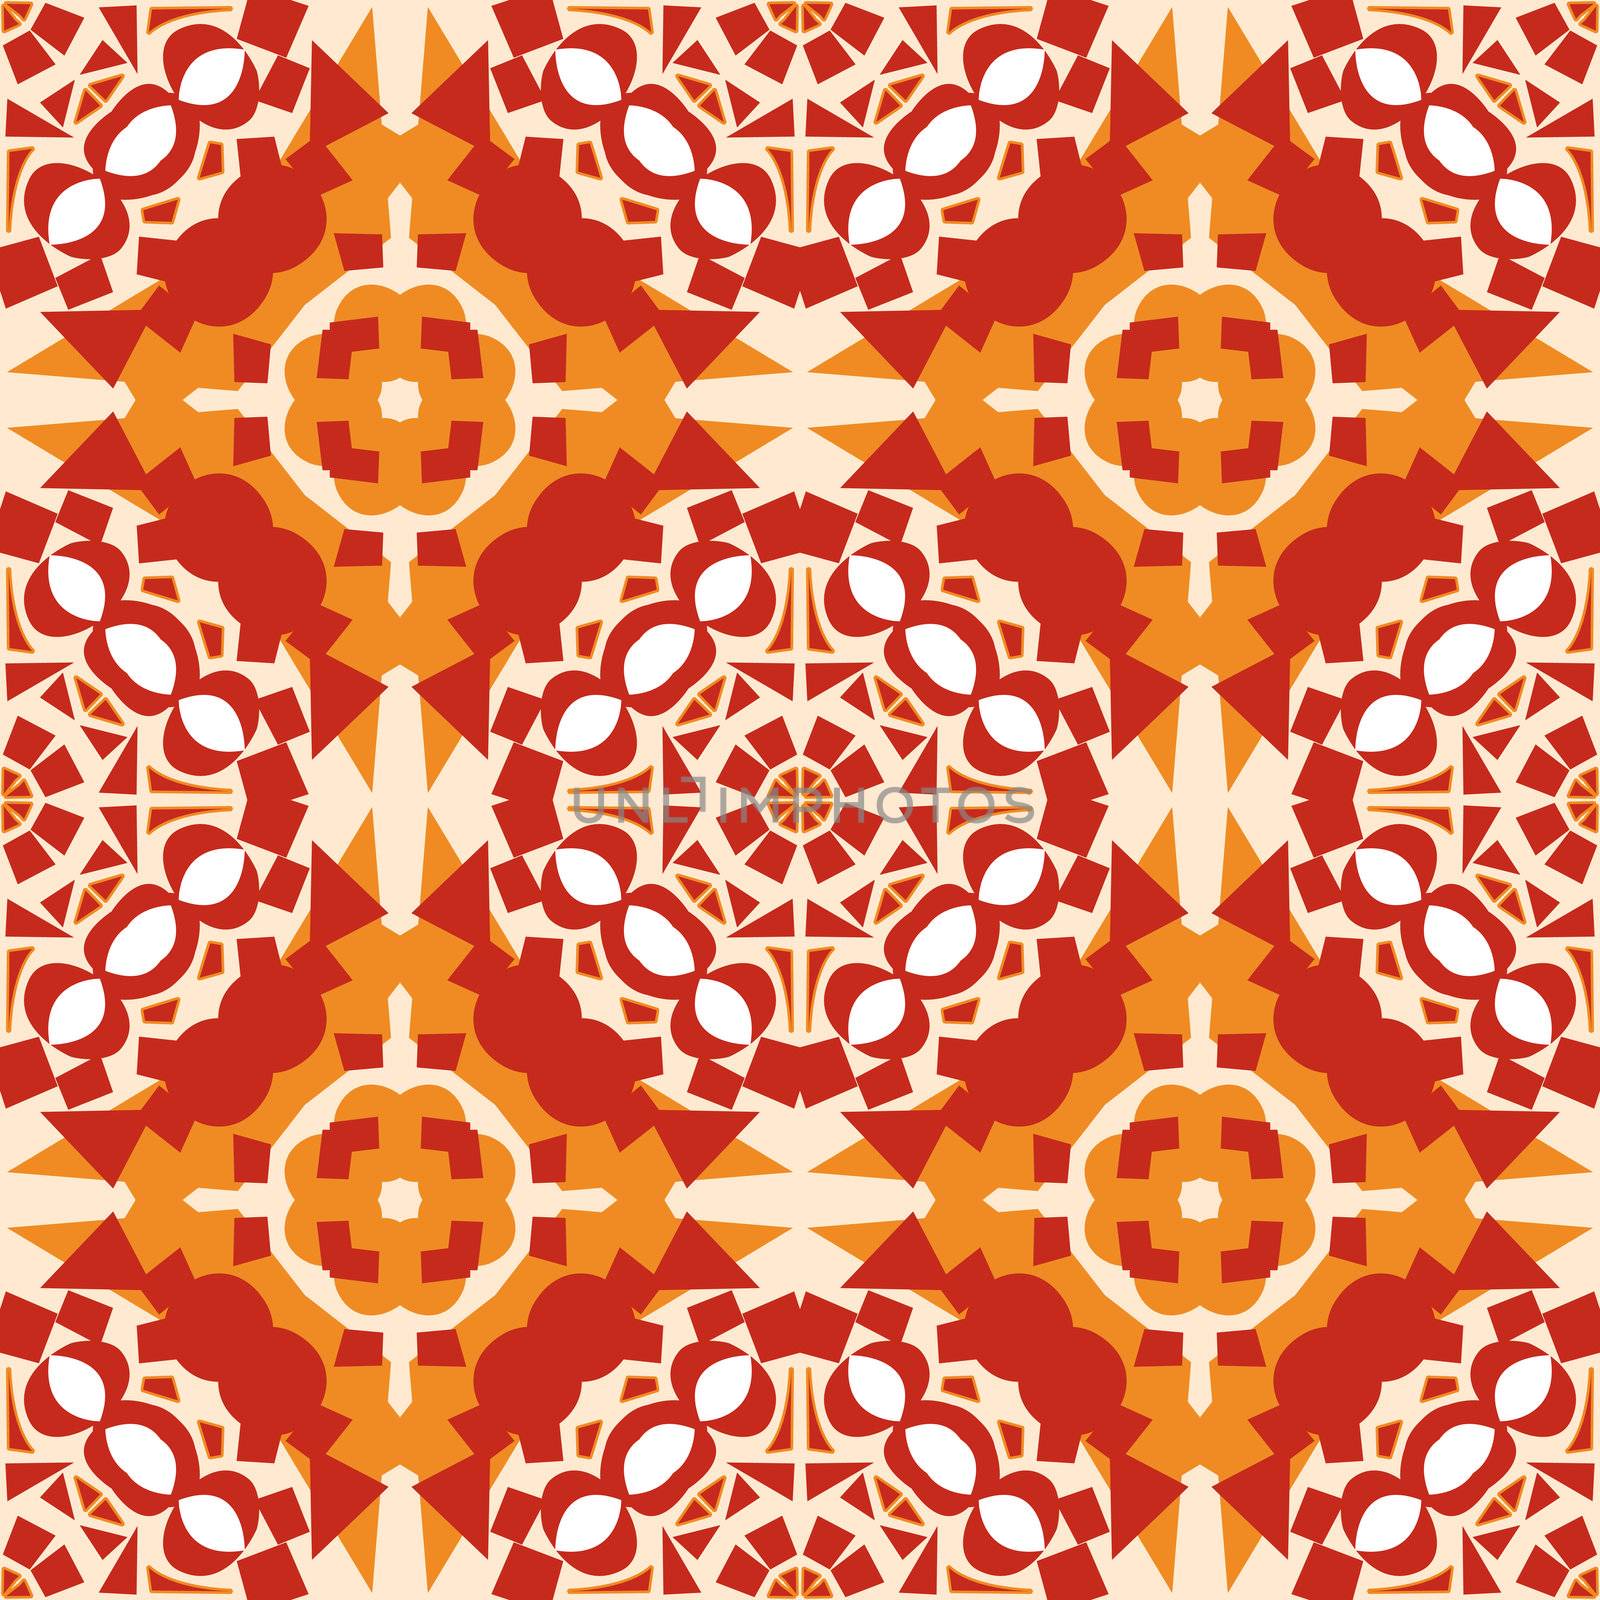 Seamless background pattern of orange and red mosaic tiles